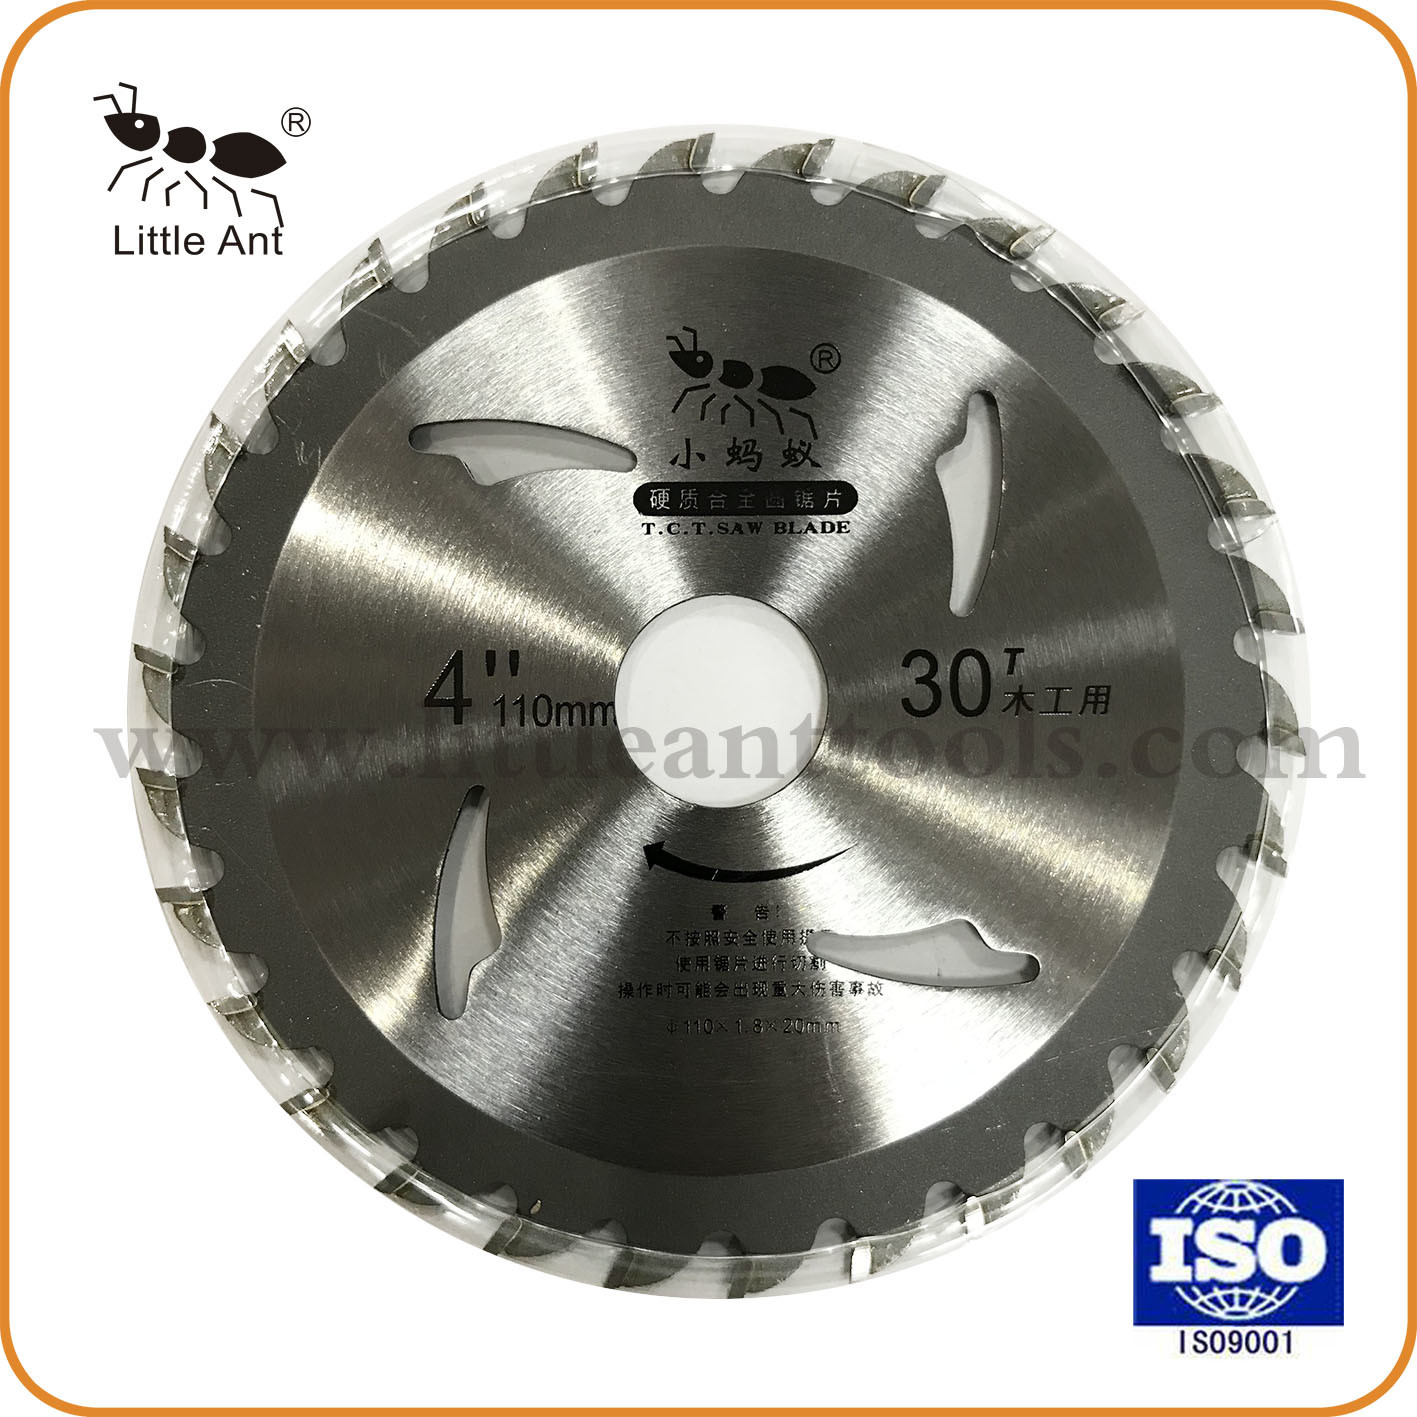 Good Quality China Tct Saw Blade for Wood (professional type)